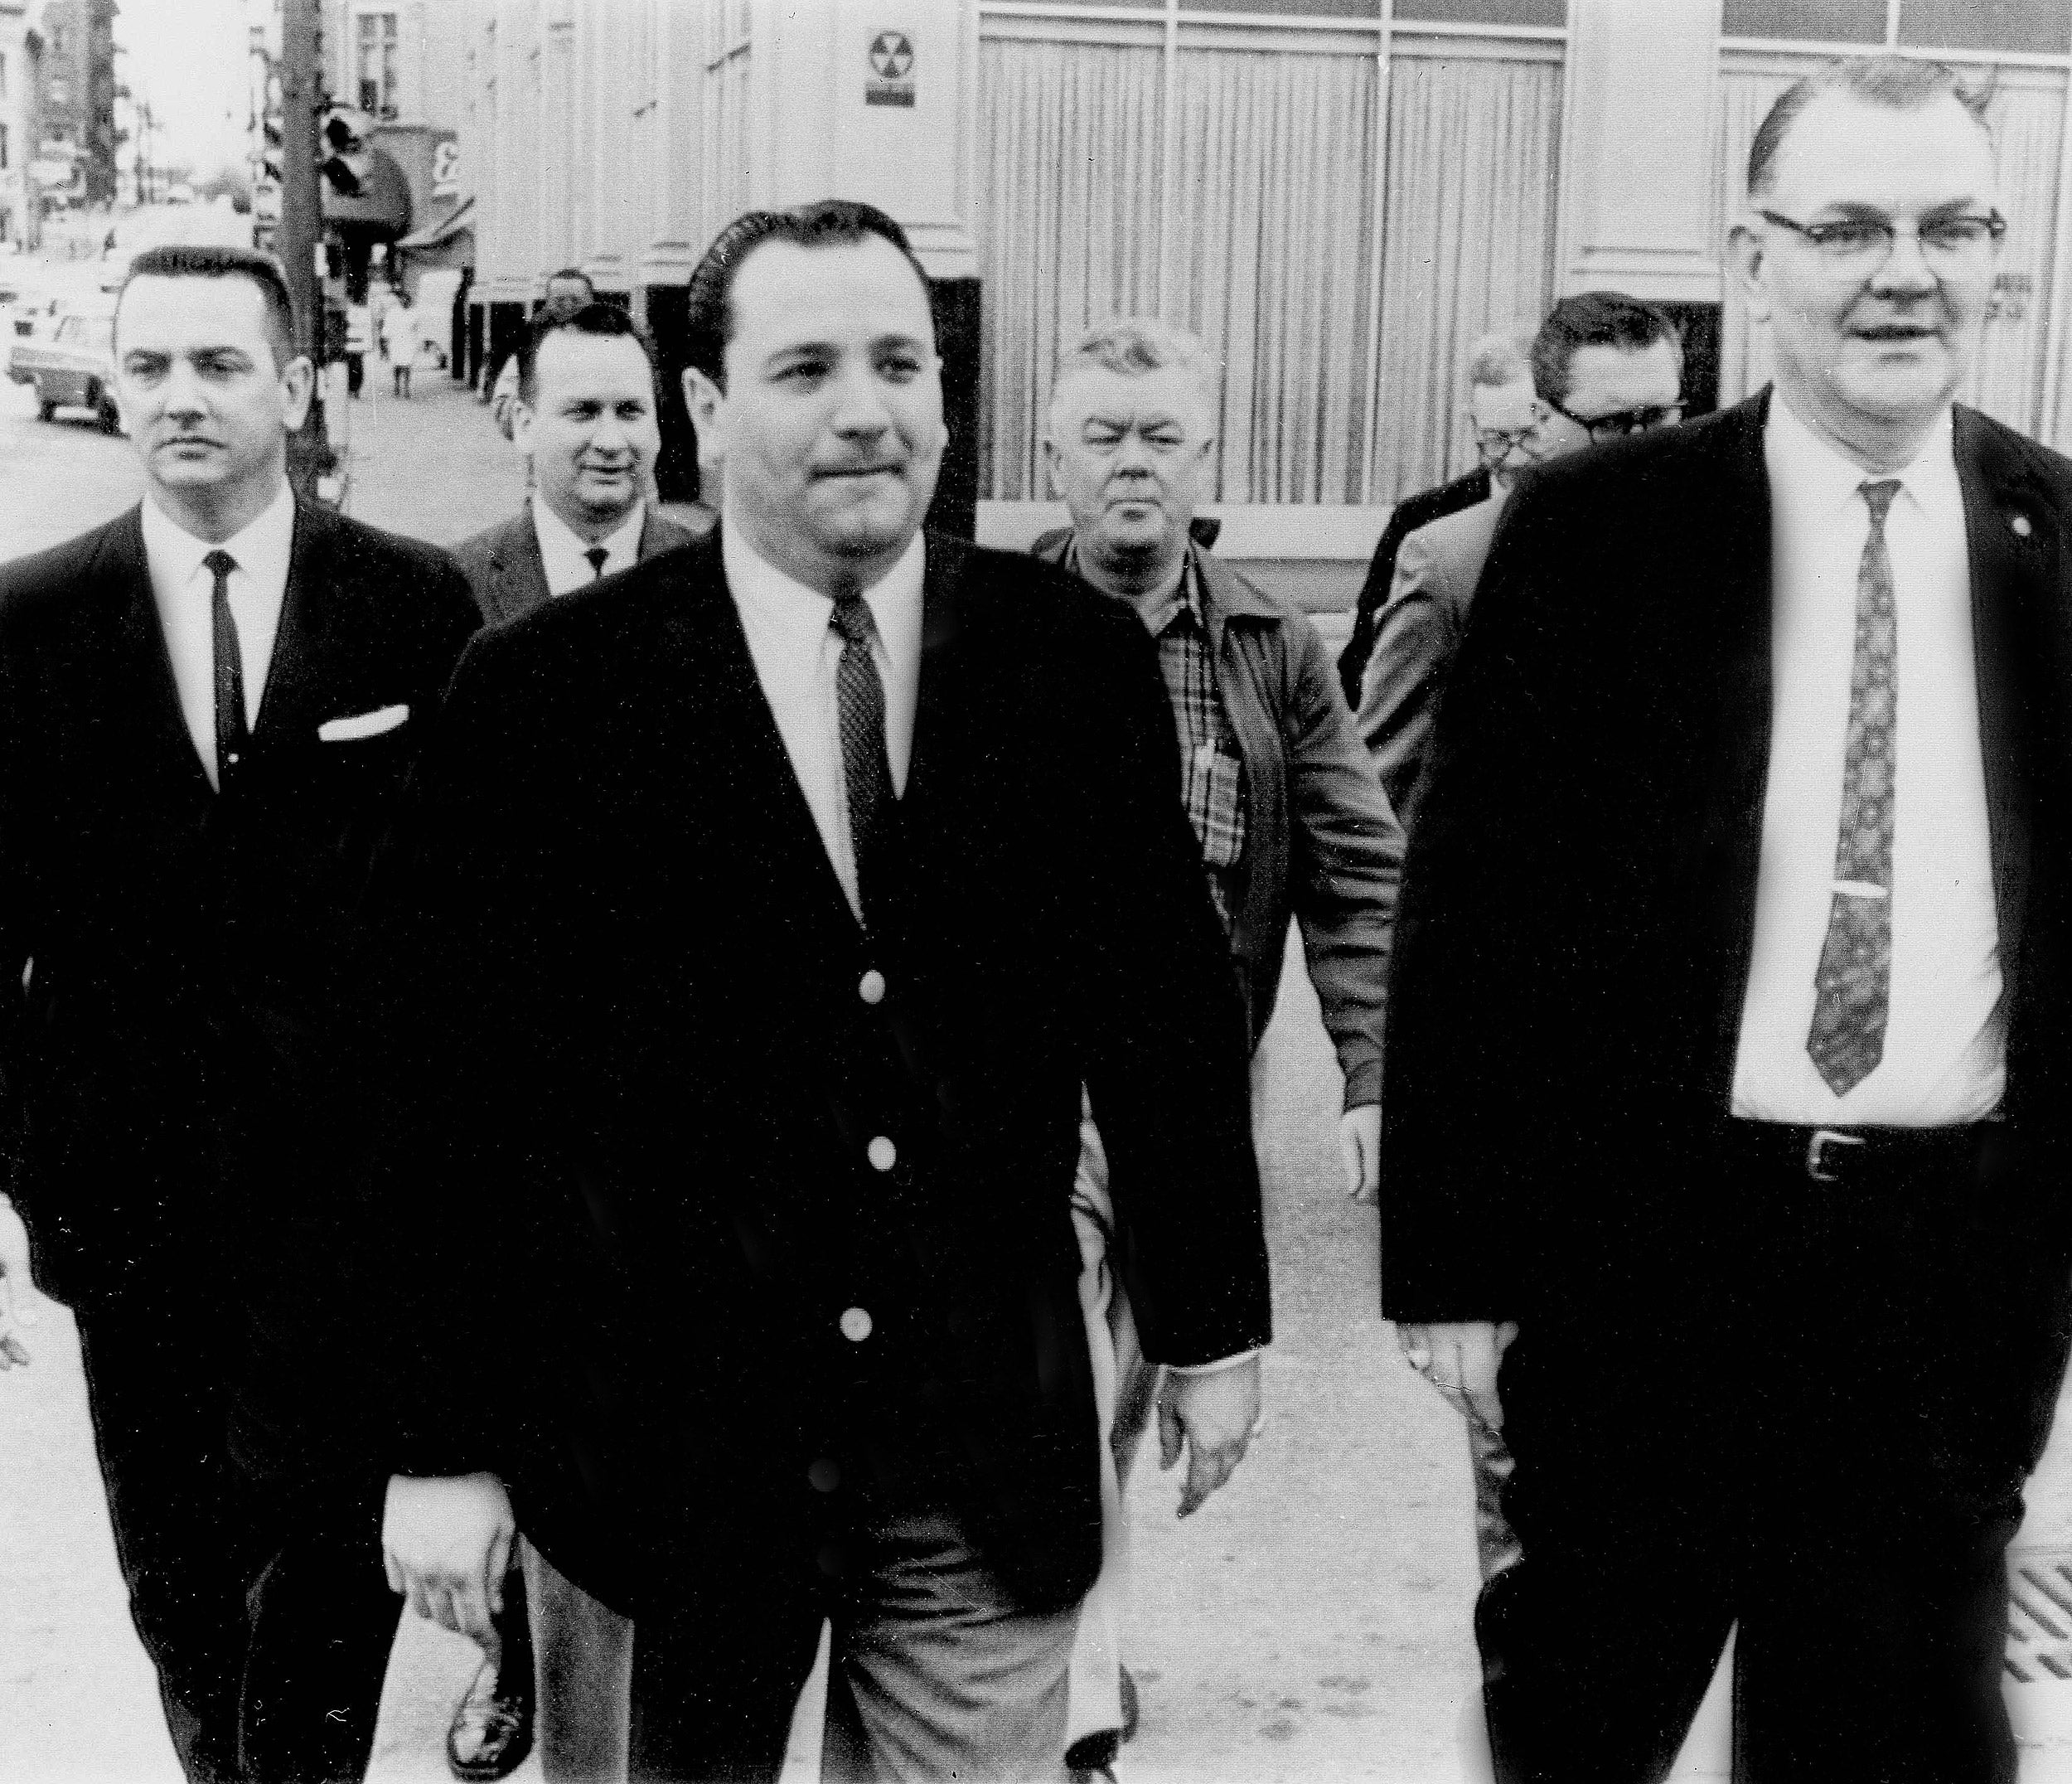 Charles L. O'Brien, center, is accompanied by U.S. marshals